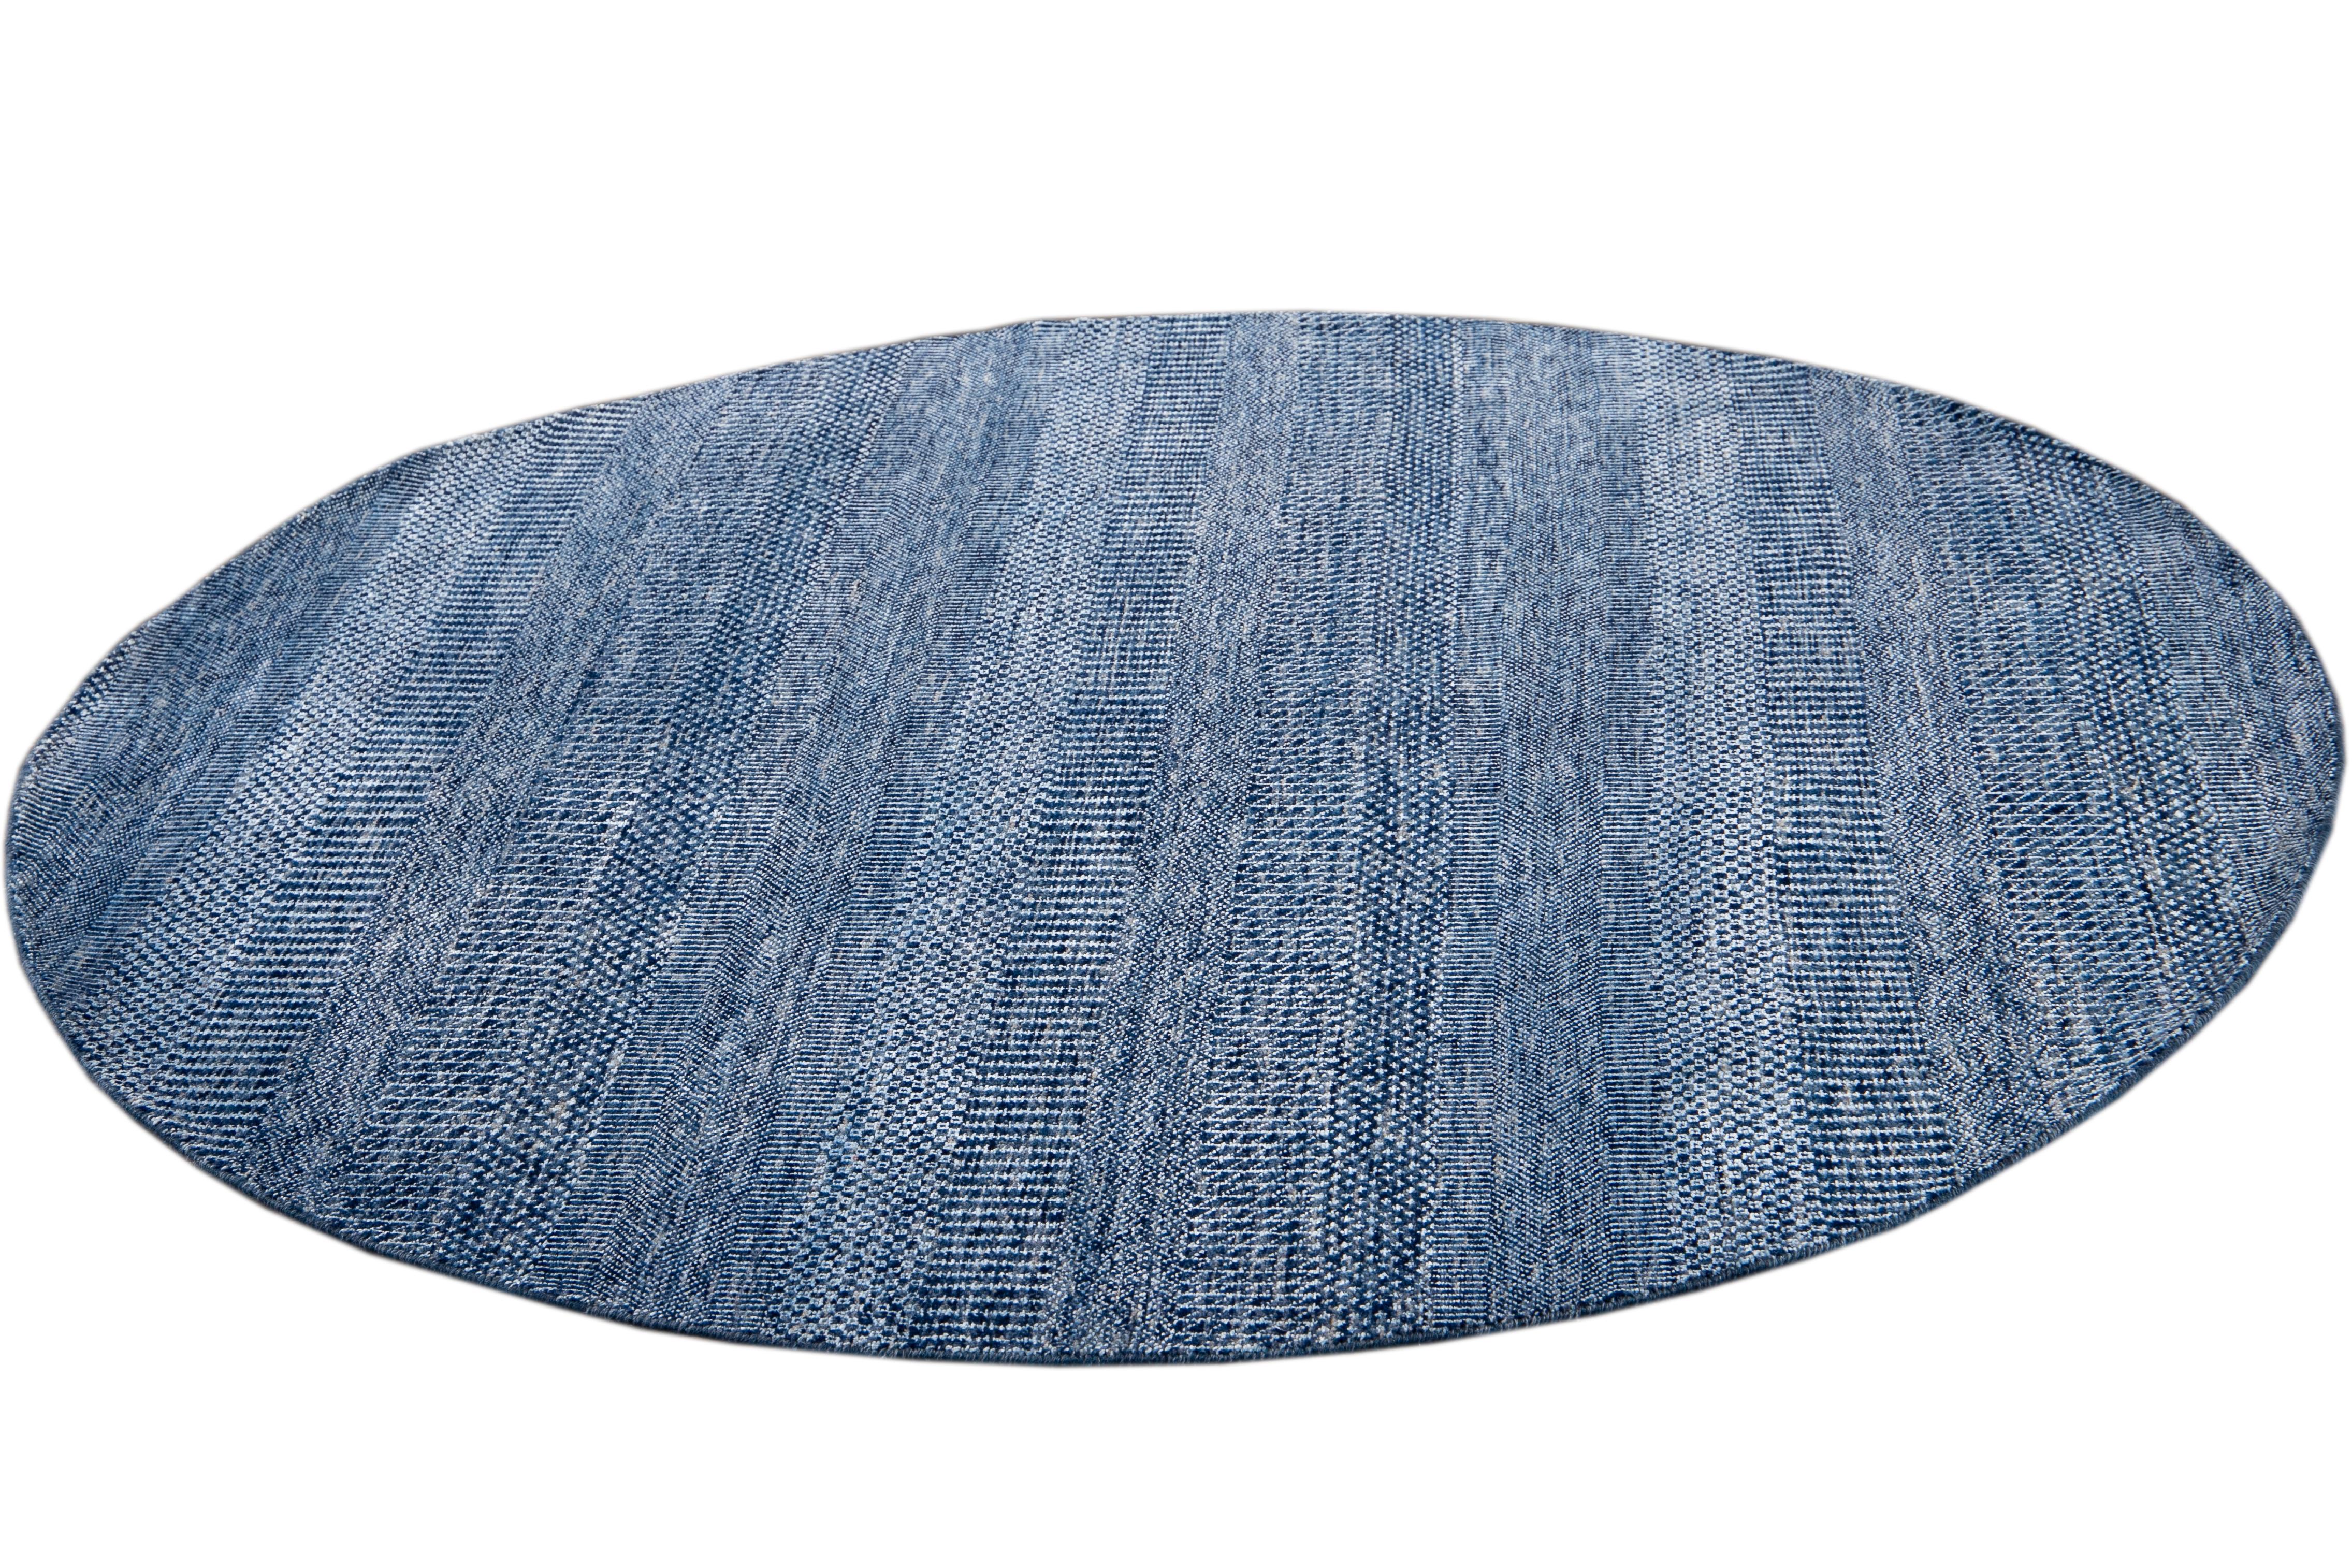 Beautiful contemporary Savannah round rug, hand knotted wool with a bright blue field in an all-over striped design.
This rug has a diameter of 6' 0